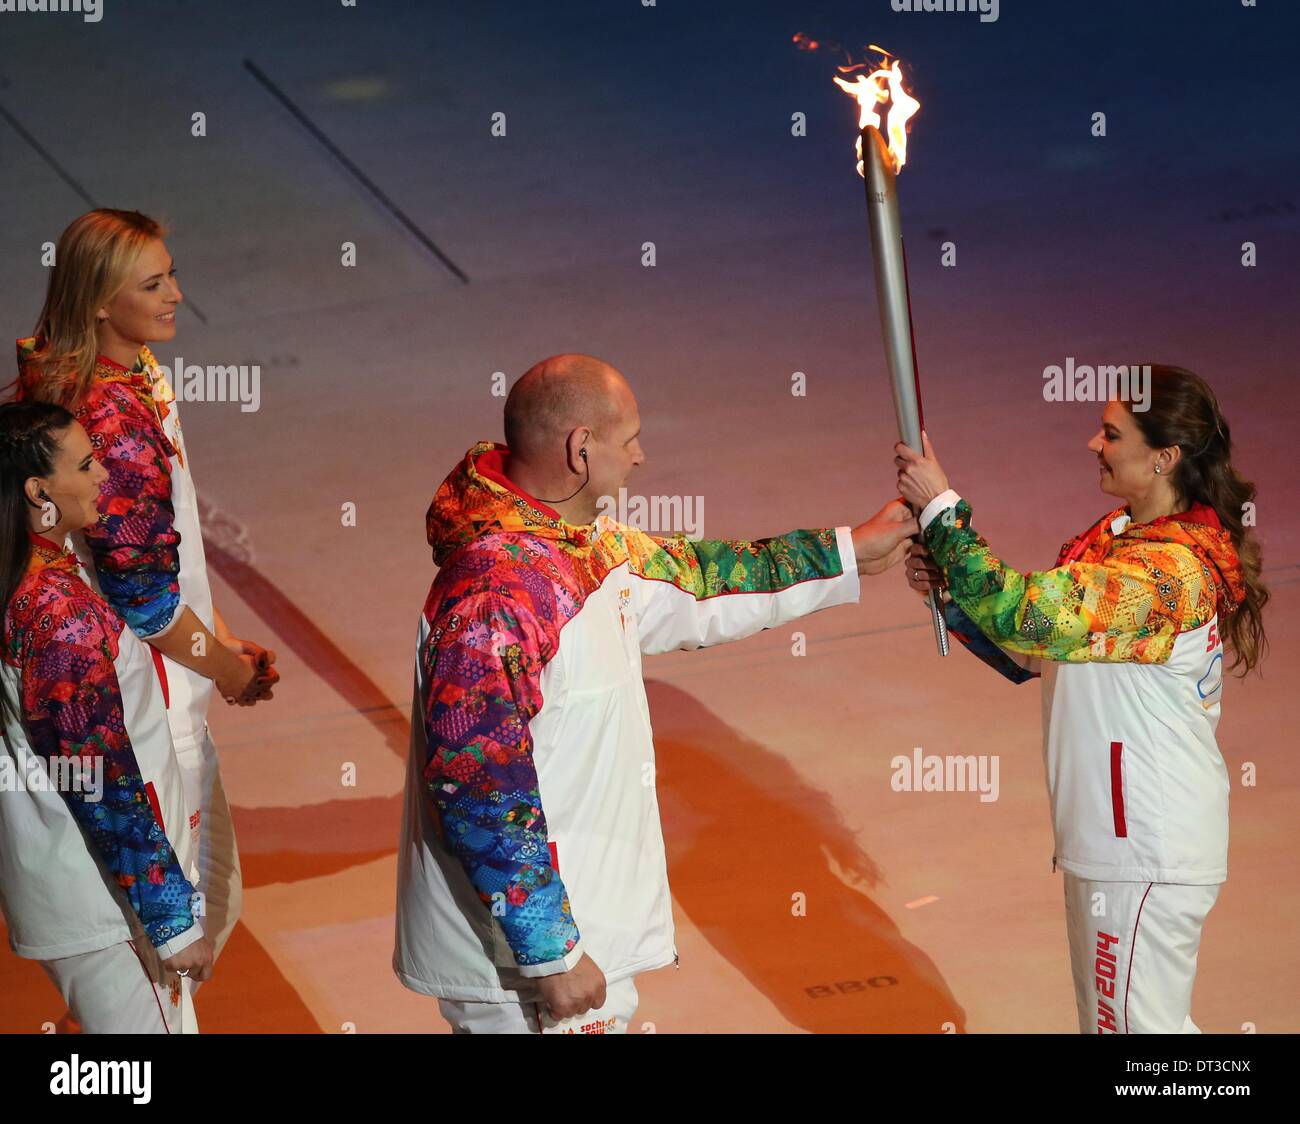 Sochi, Russia. 07 February 2014. Alexandr Karelin (C) receives the Olympic torch from Alina Kabaeva (R) of Russia as Russian pole vaulter Yelena Isinbayeva and tennis player Maria Sharapova (back) of Russia follow during the Opening Ceremony in Fisht Olympic Stadium at the Sochi 2014 Olympic Games, Sochi, Russia, 07 February 2014. Photo: Fredrik von Erichsen/dpa/Alamy Live News Stock Photo